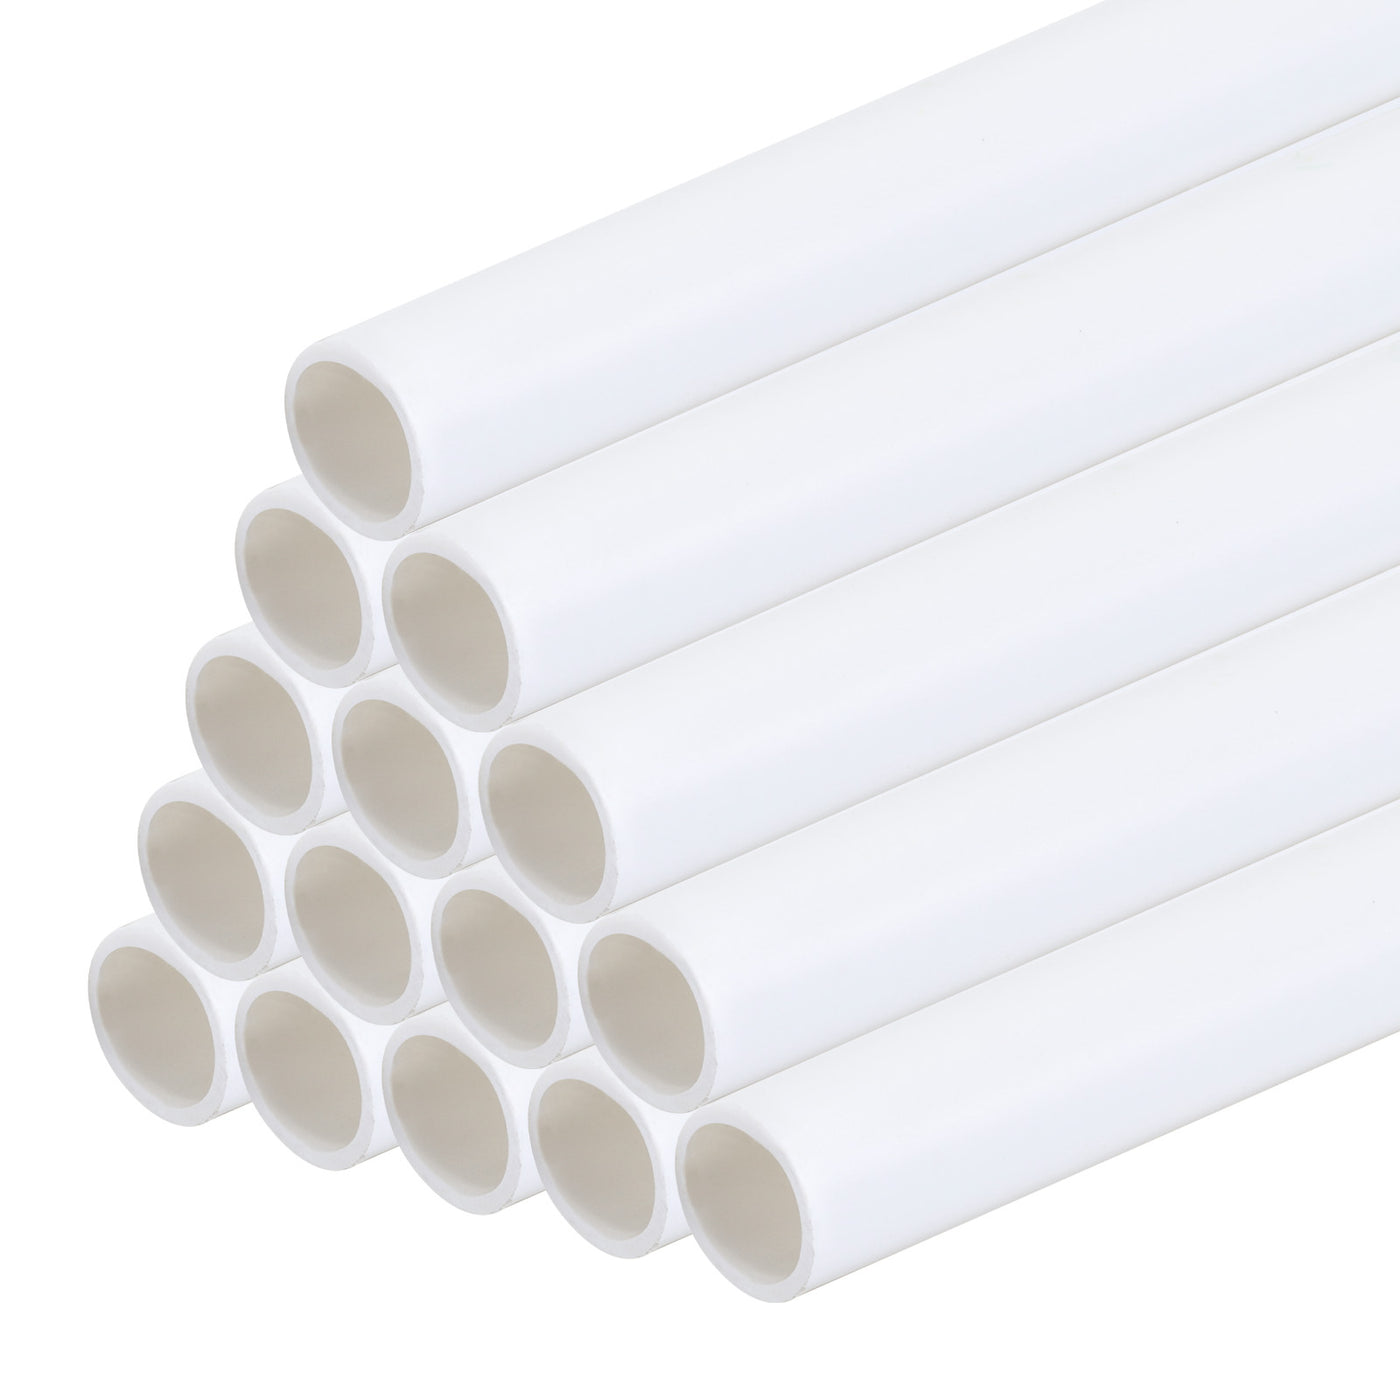 Harfington 25pcs 10" Plastic Model Tube ABS Round Tube 0.39" OD White Easy Processing for Architectural Model Making DIY